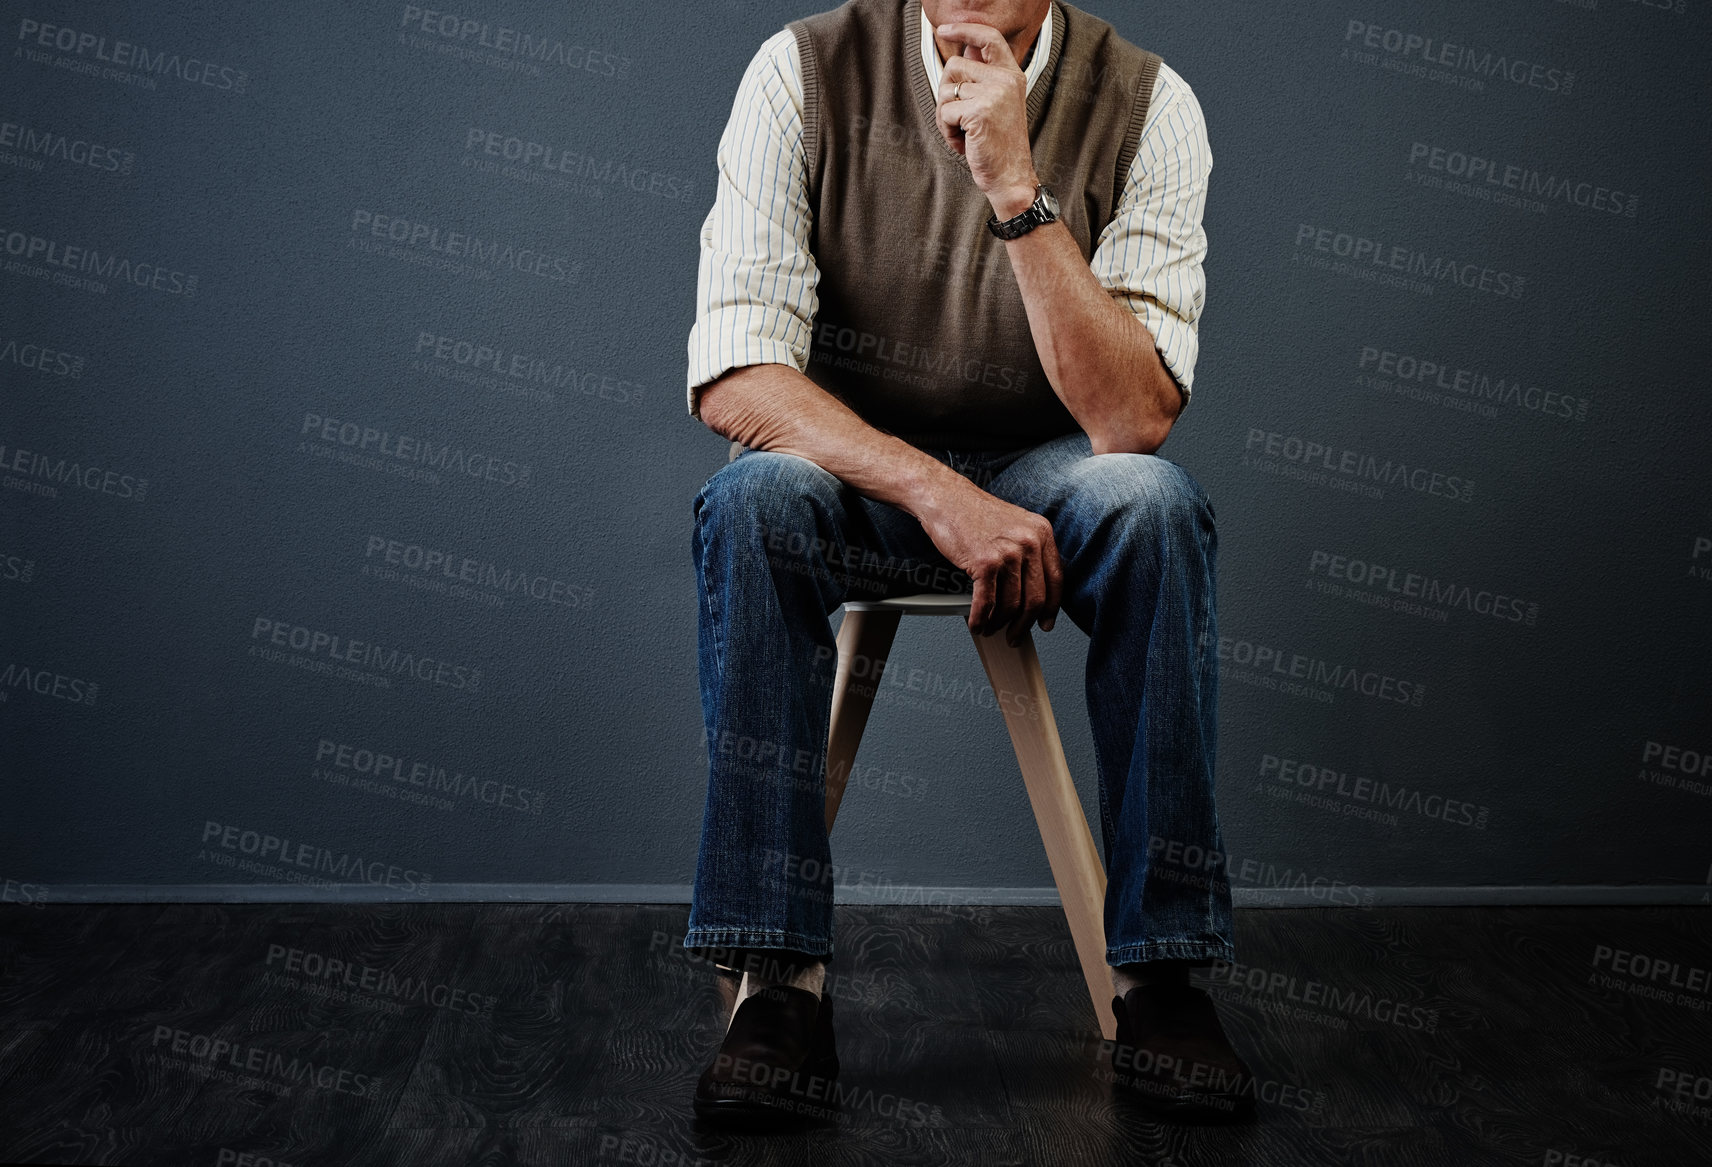 Buy stock photo Studio shot of an unrecognizable man looking thoughtful while sitting on a stool against a dark background